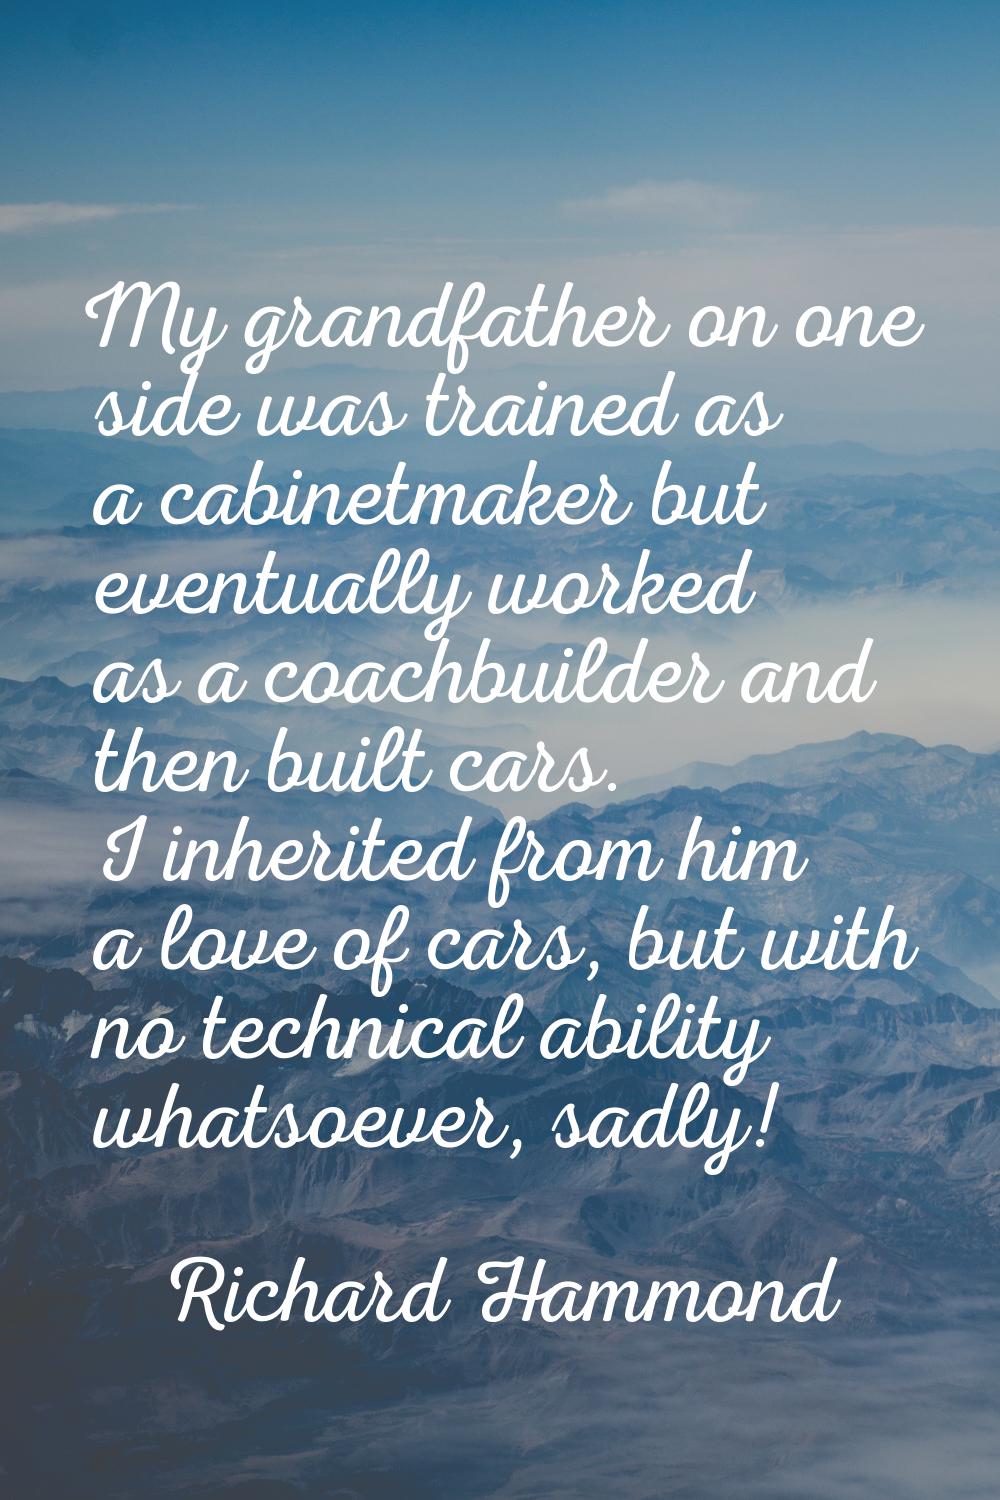 My grandfather on one side was trained as a cabinetmaker but eventually worked as a coachbuilder an